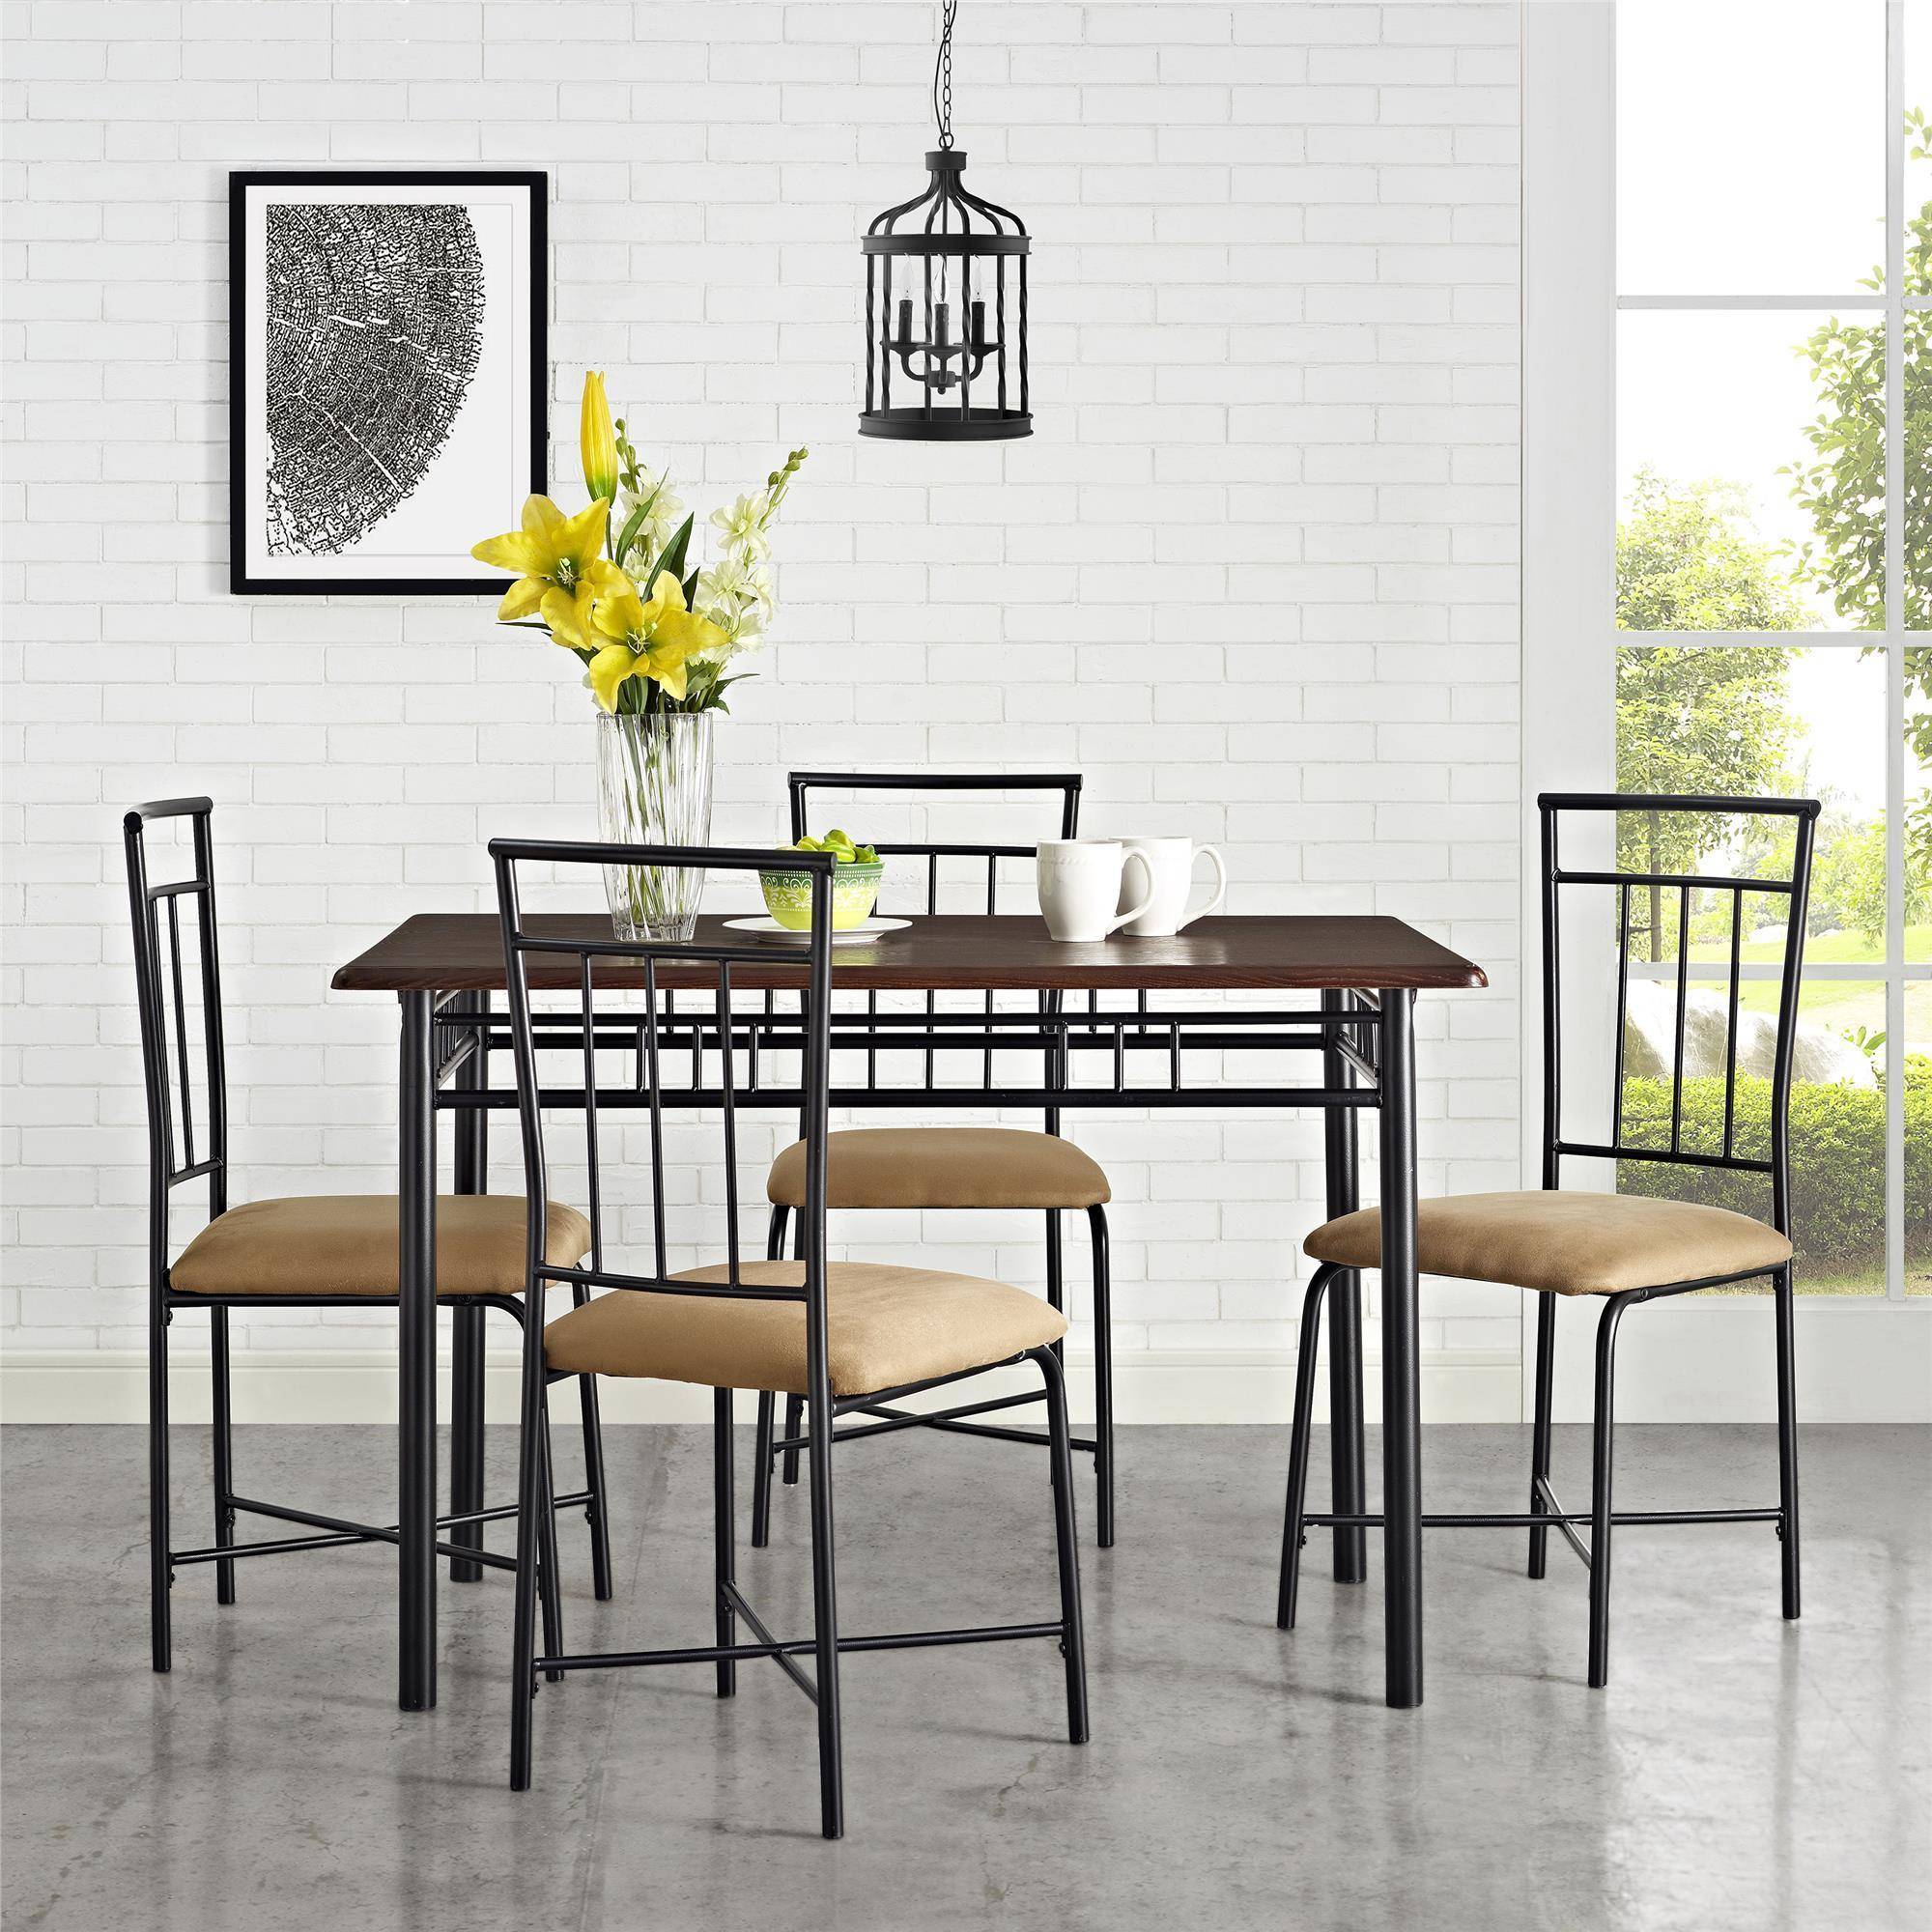 Mainstays 5 Piece Dining Set (Multiple Colors) Only $100.00!